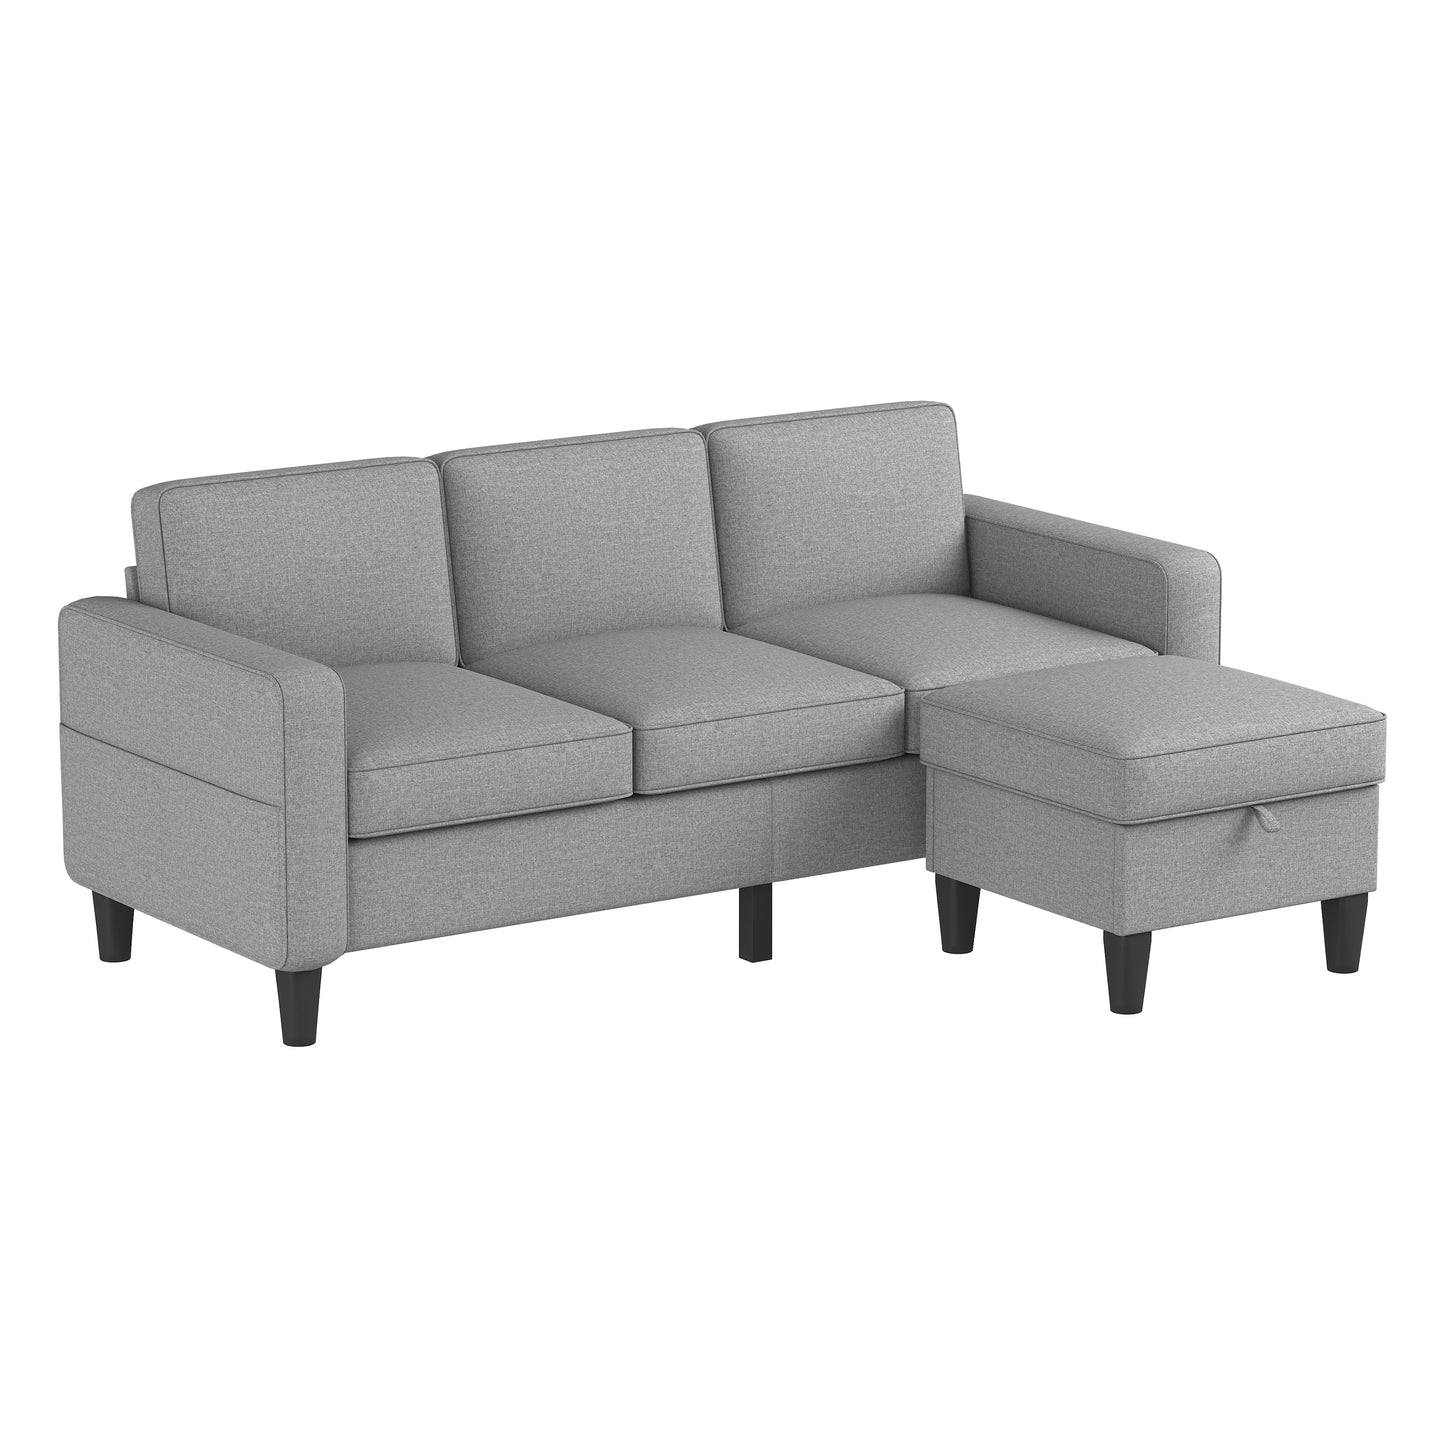 Best Choice Products Upholstered Sectional Sofa for Home, Apartment, Dorm, Bonus Room, Compact Spaces w/Chaise Lounge, 3-Seat, L-Shape Design, Reversible Ottoman Bench, 680lb Capacity - Light Gray